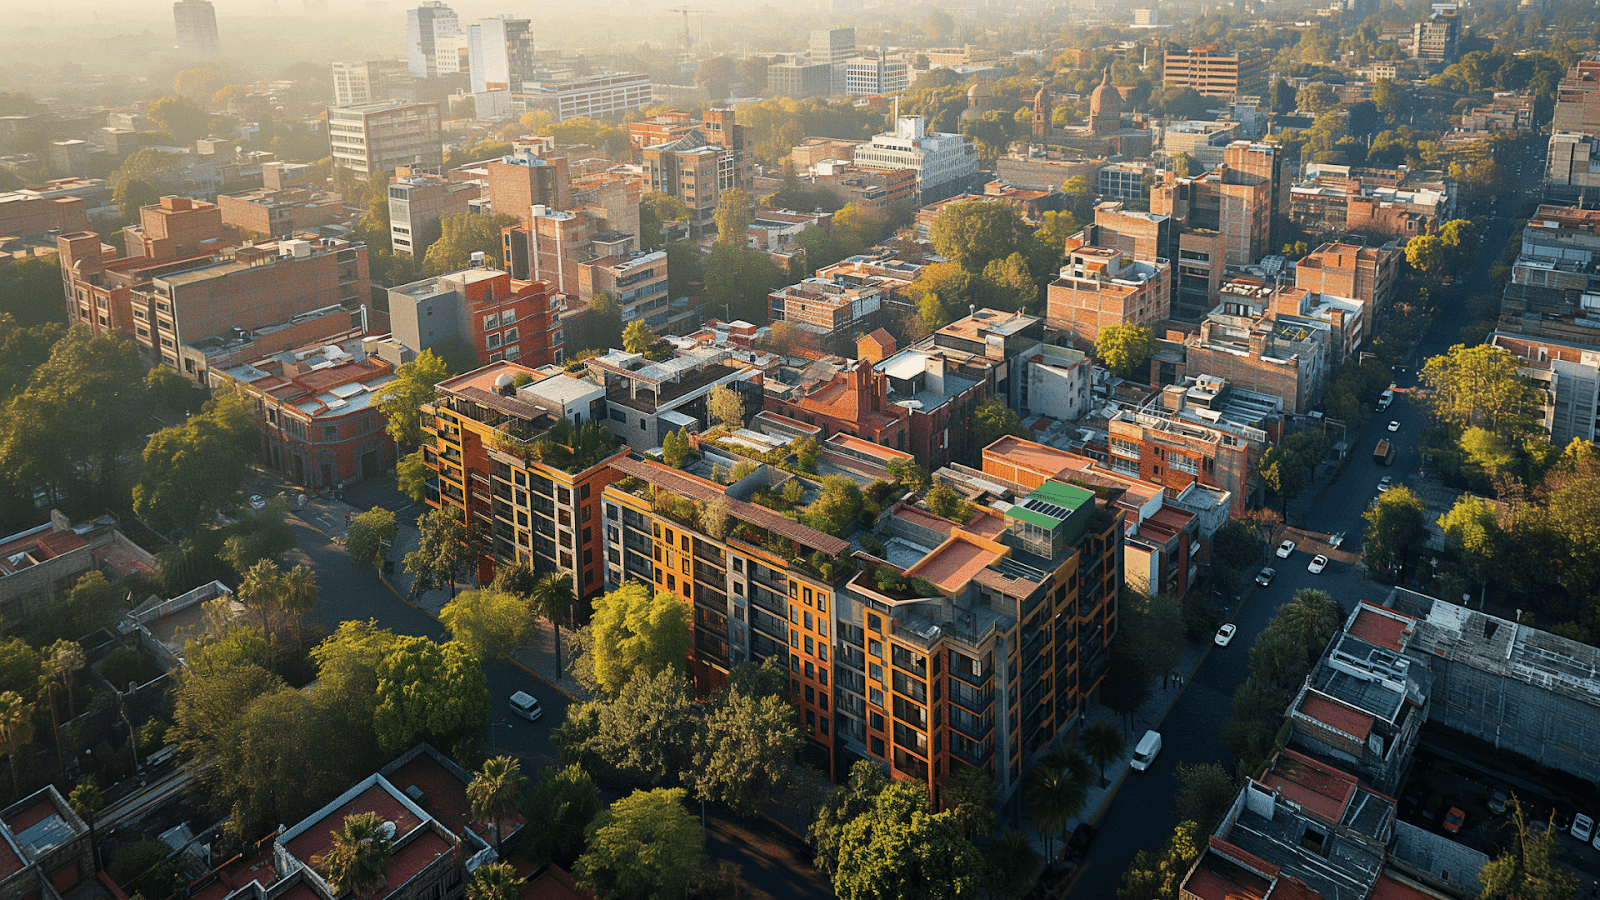 Sunrise over the urban landscape near best hotels in Polanco, Mexico City